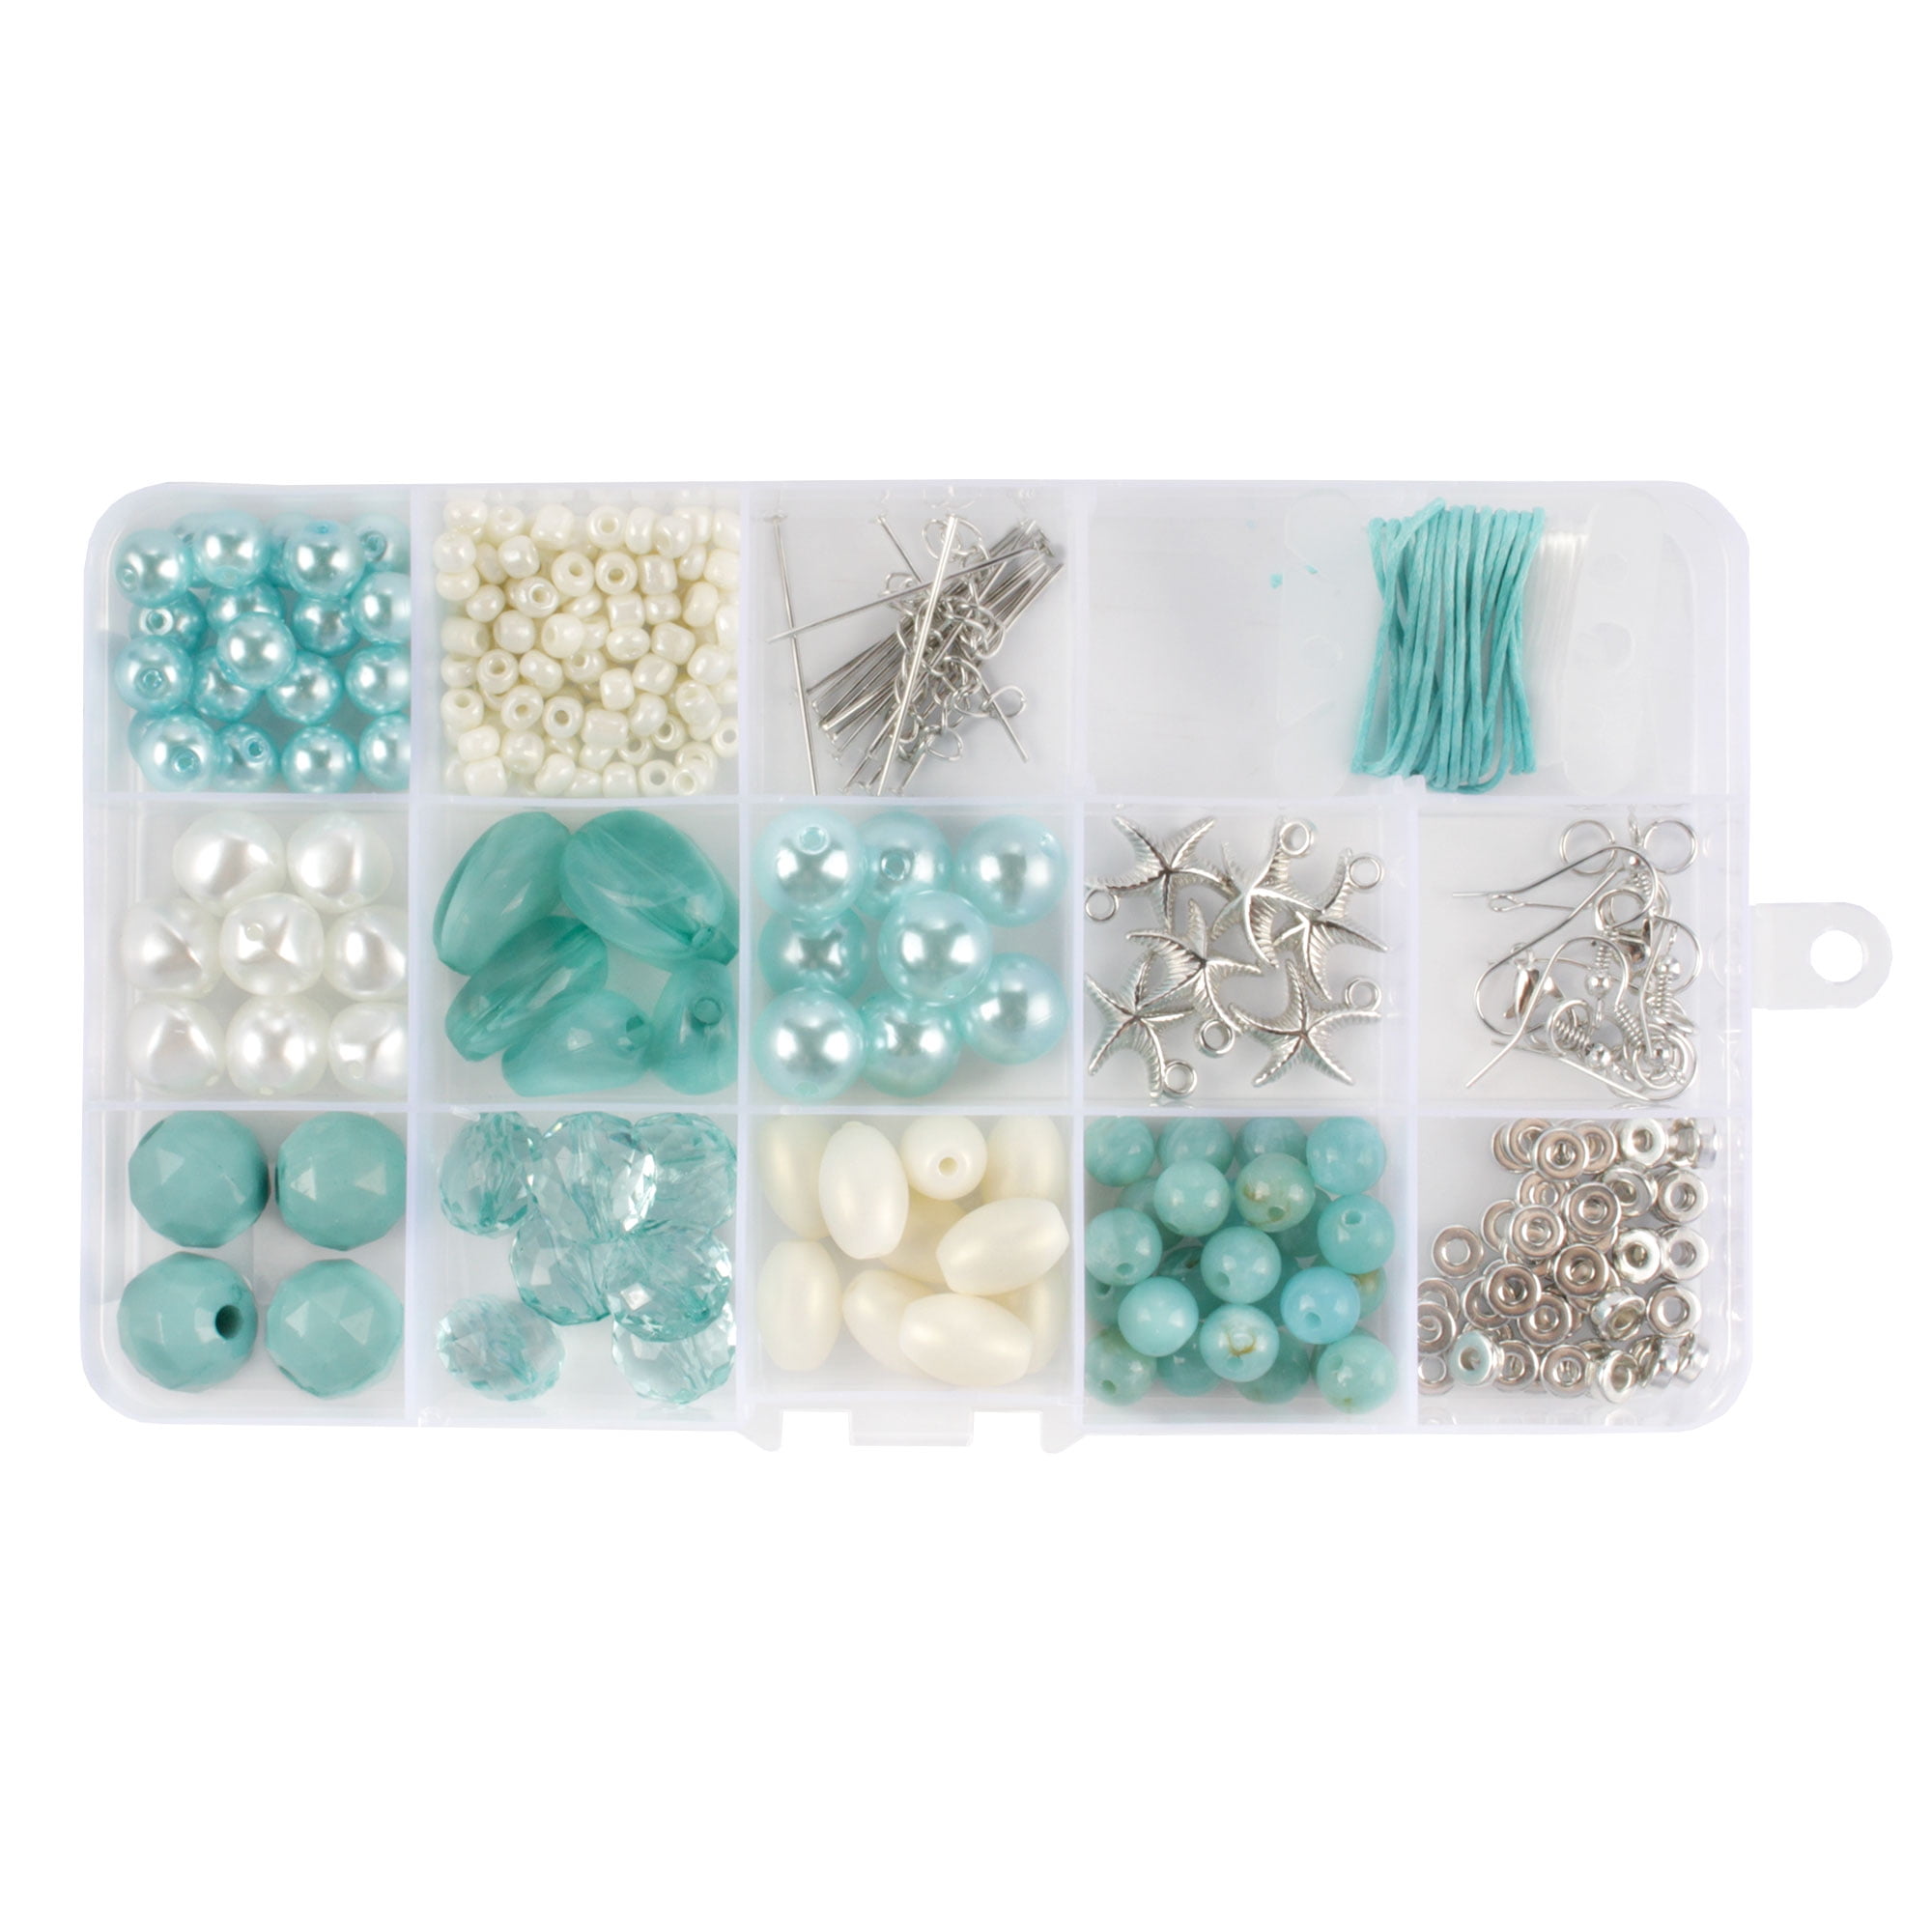 EXCEART 600 Pcs Jewelry Kits Jewlery Kit Decked Accessories Bejeweled Kit  Decorative Curtains Jewelry Accessories Glass Beads Crack Bead Beaded Round